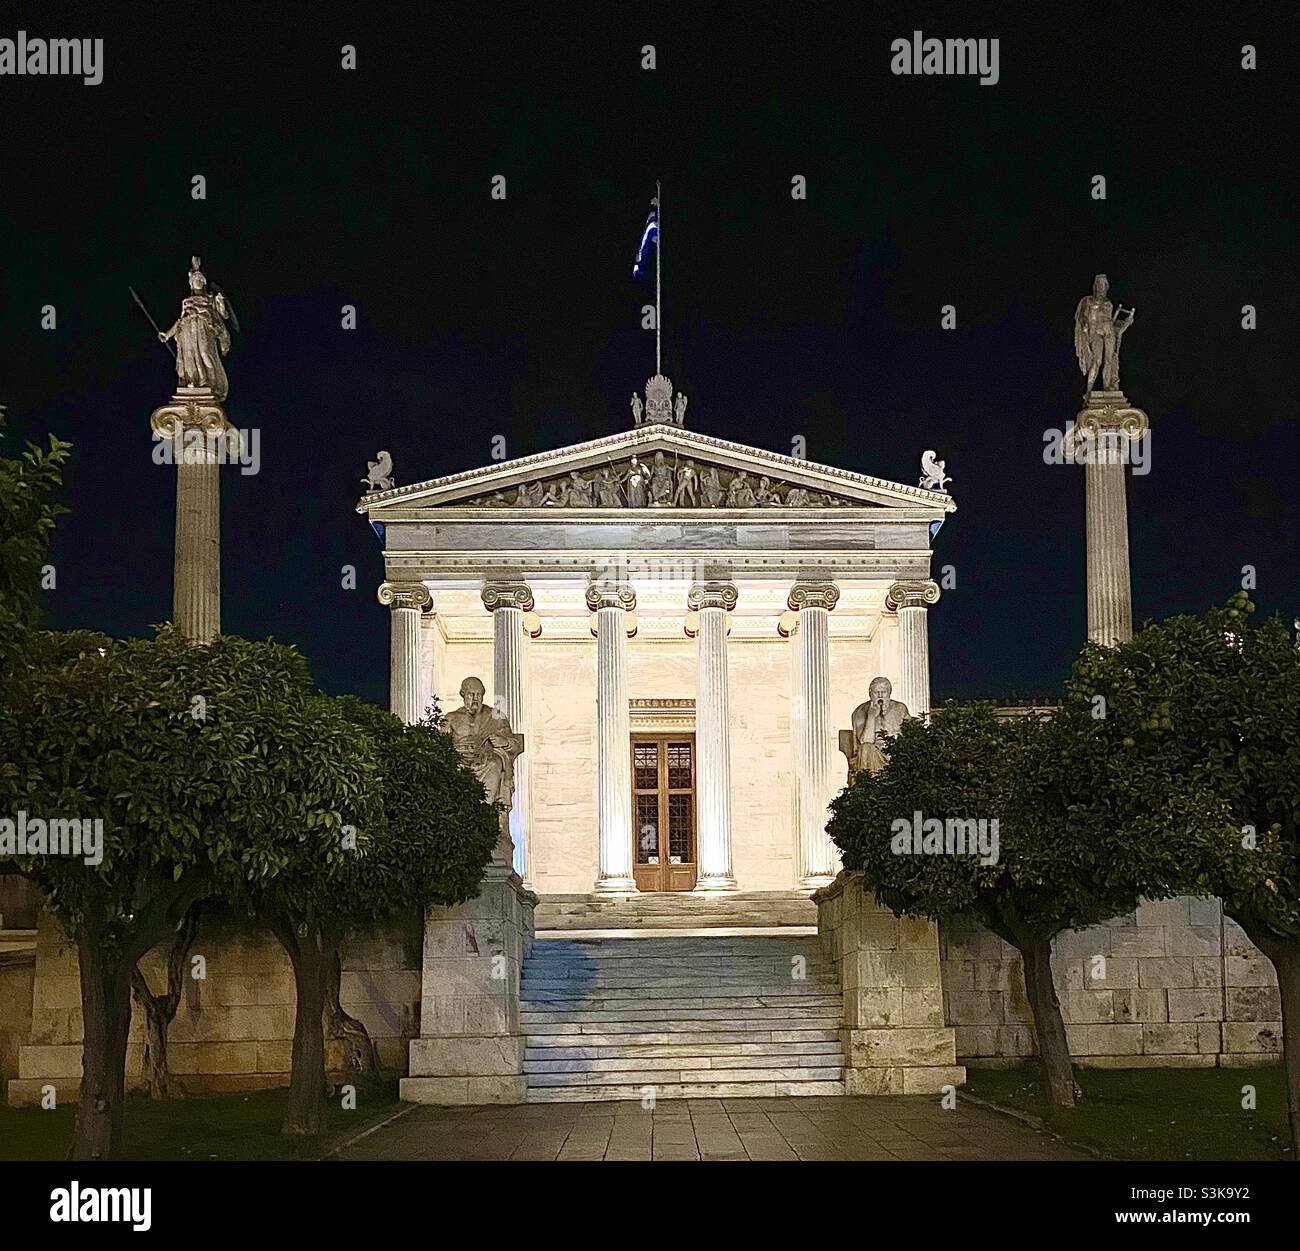 The Academy of Athens, Greece, late at night, the oldest and highest research institution in Greece. The building is part of an architectural trilogy alongside the National Library and the University. Stock Photo